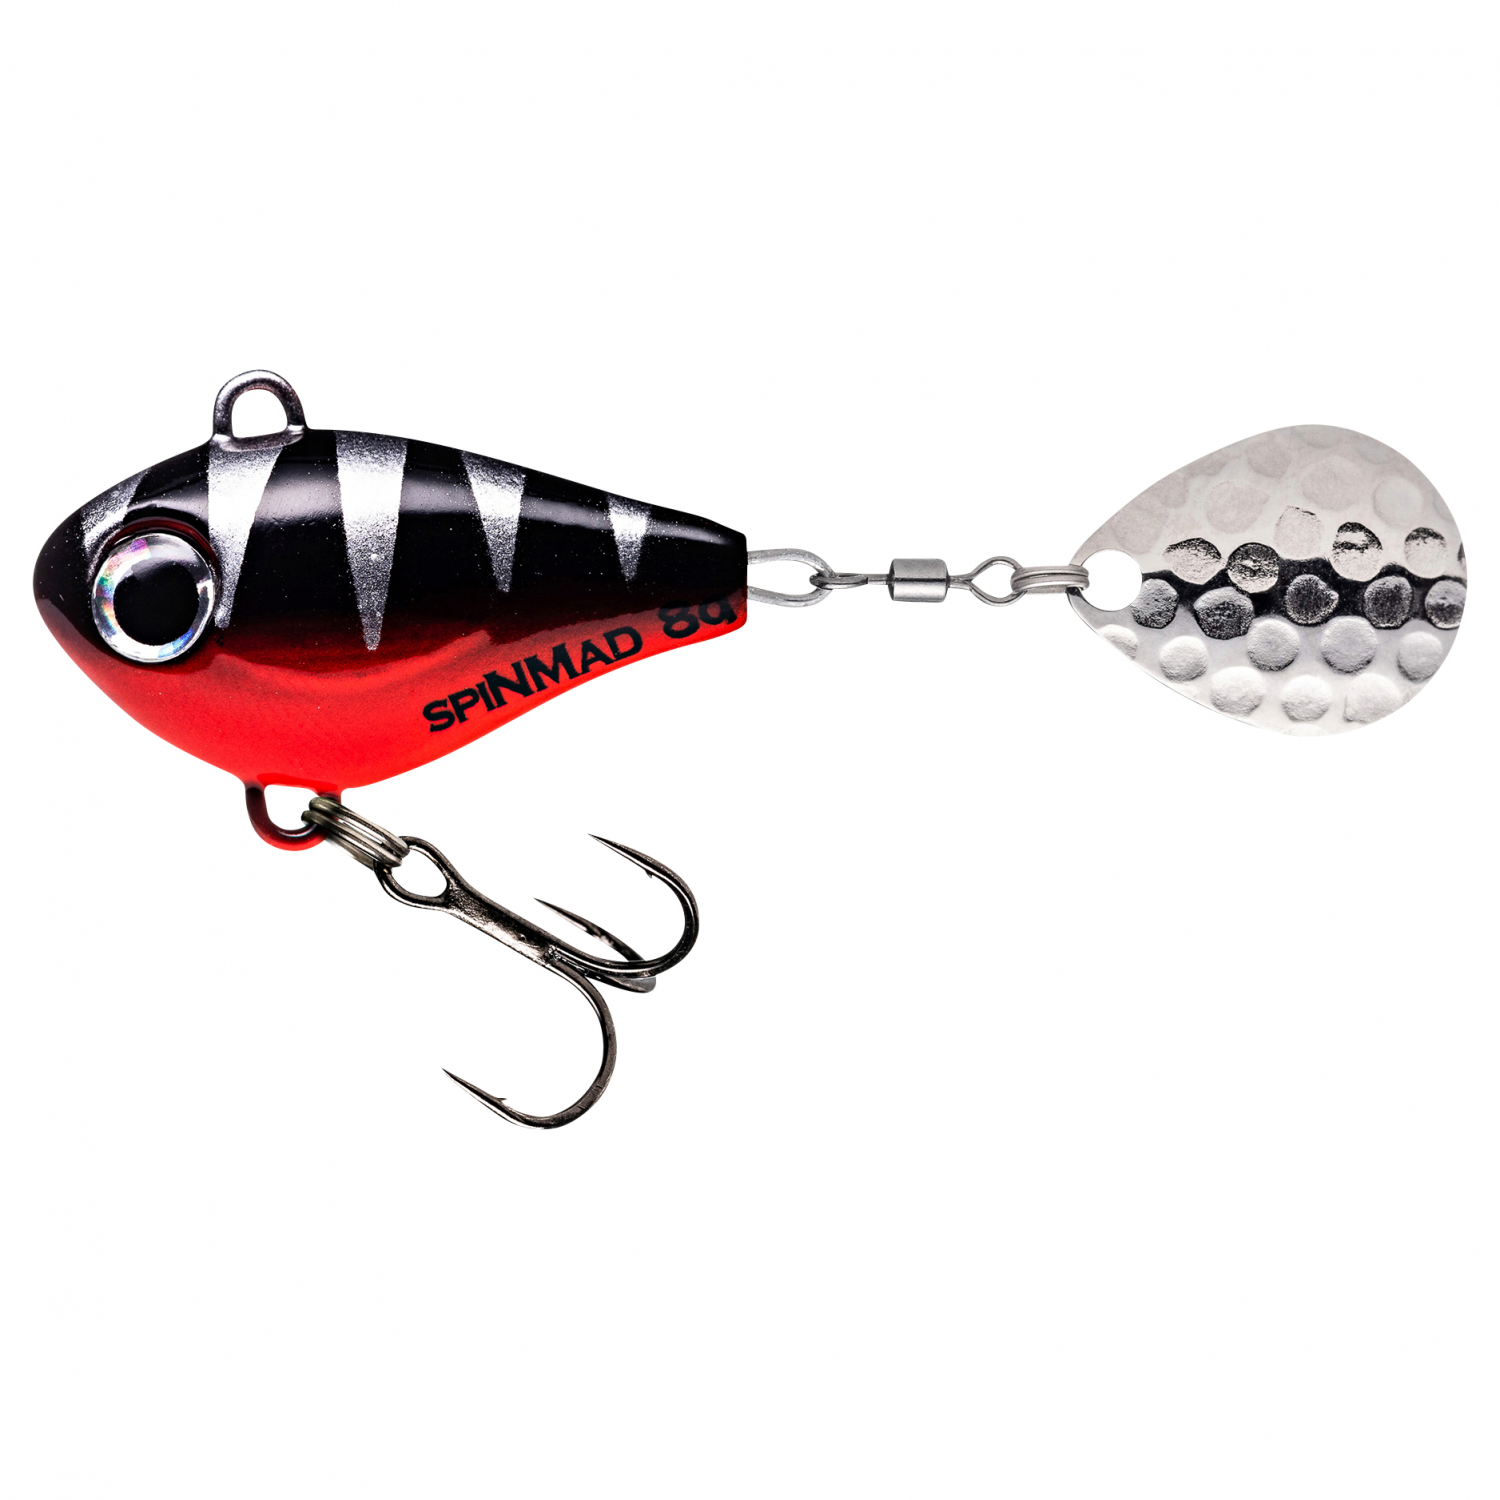 SpinMad Lead Head Spinners Jigmaster (Black Perch, 8 g) 